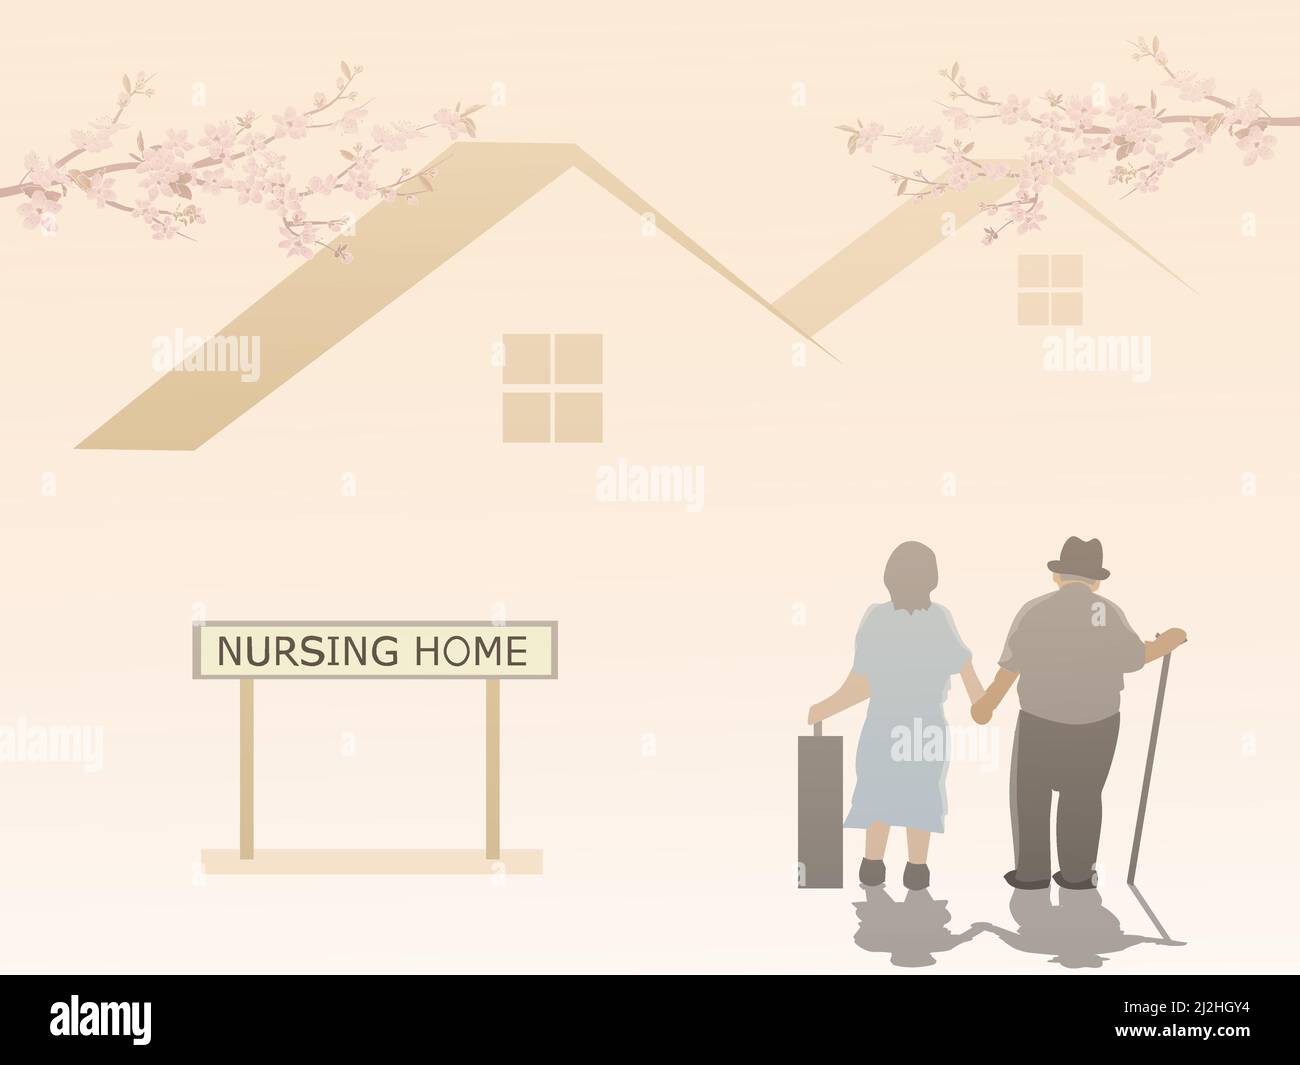 An elderly couple is entering a nursing home with a house and pink sky in the background. Stock Vector